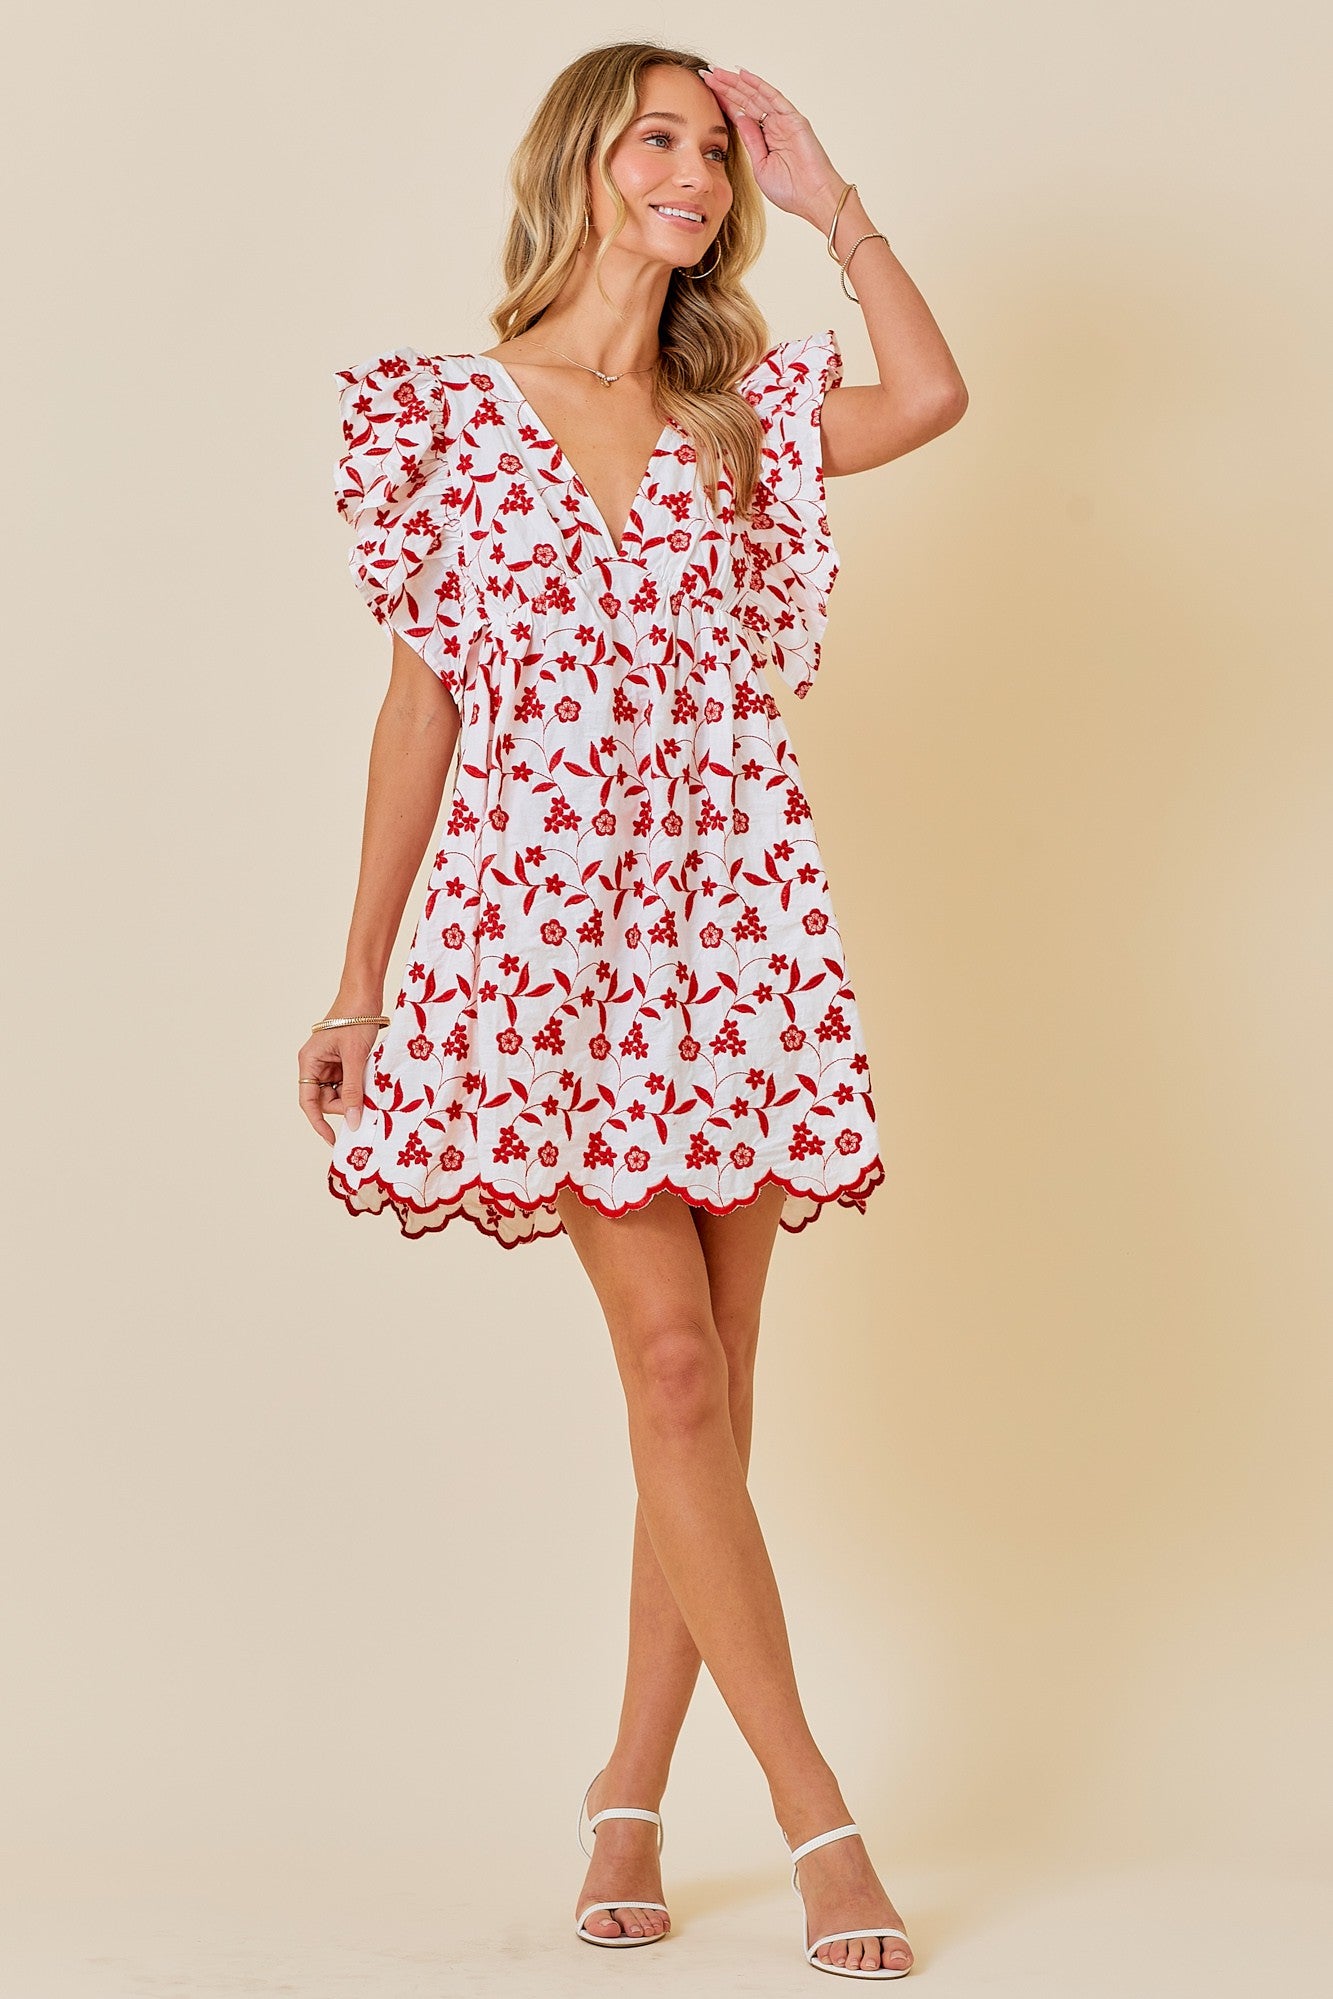 Elevate your game day style with our cotton lace eyelet dress! Perfectly paired with your favorite boots, this dress exudes confidence and charm. Cheer on your team in comfort and style.